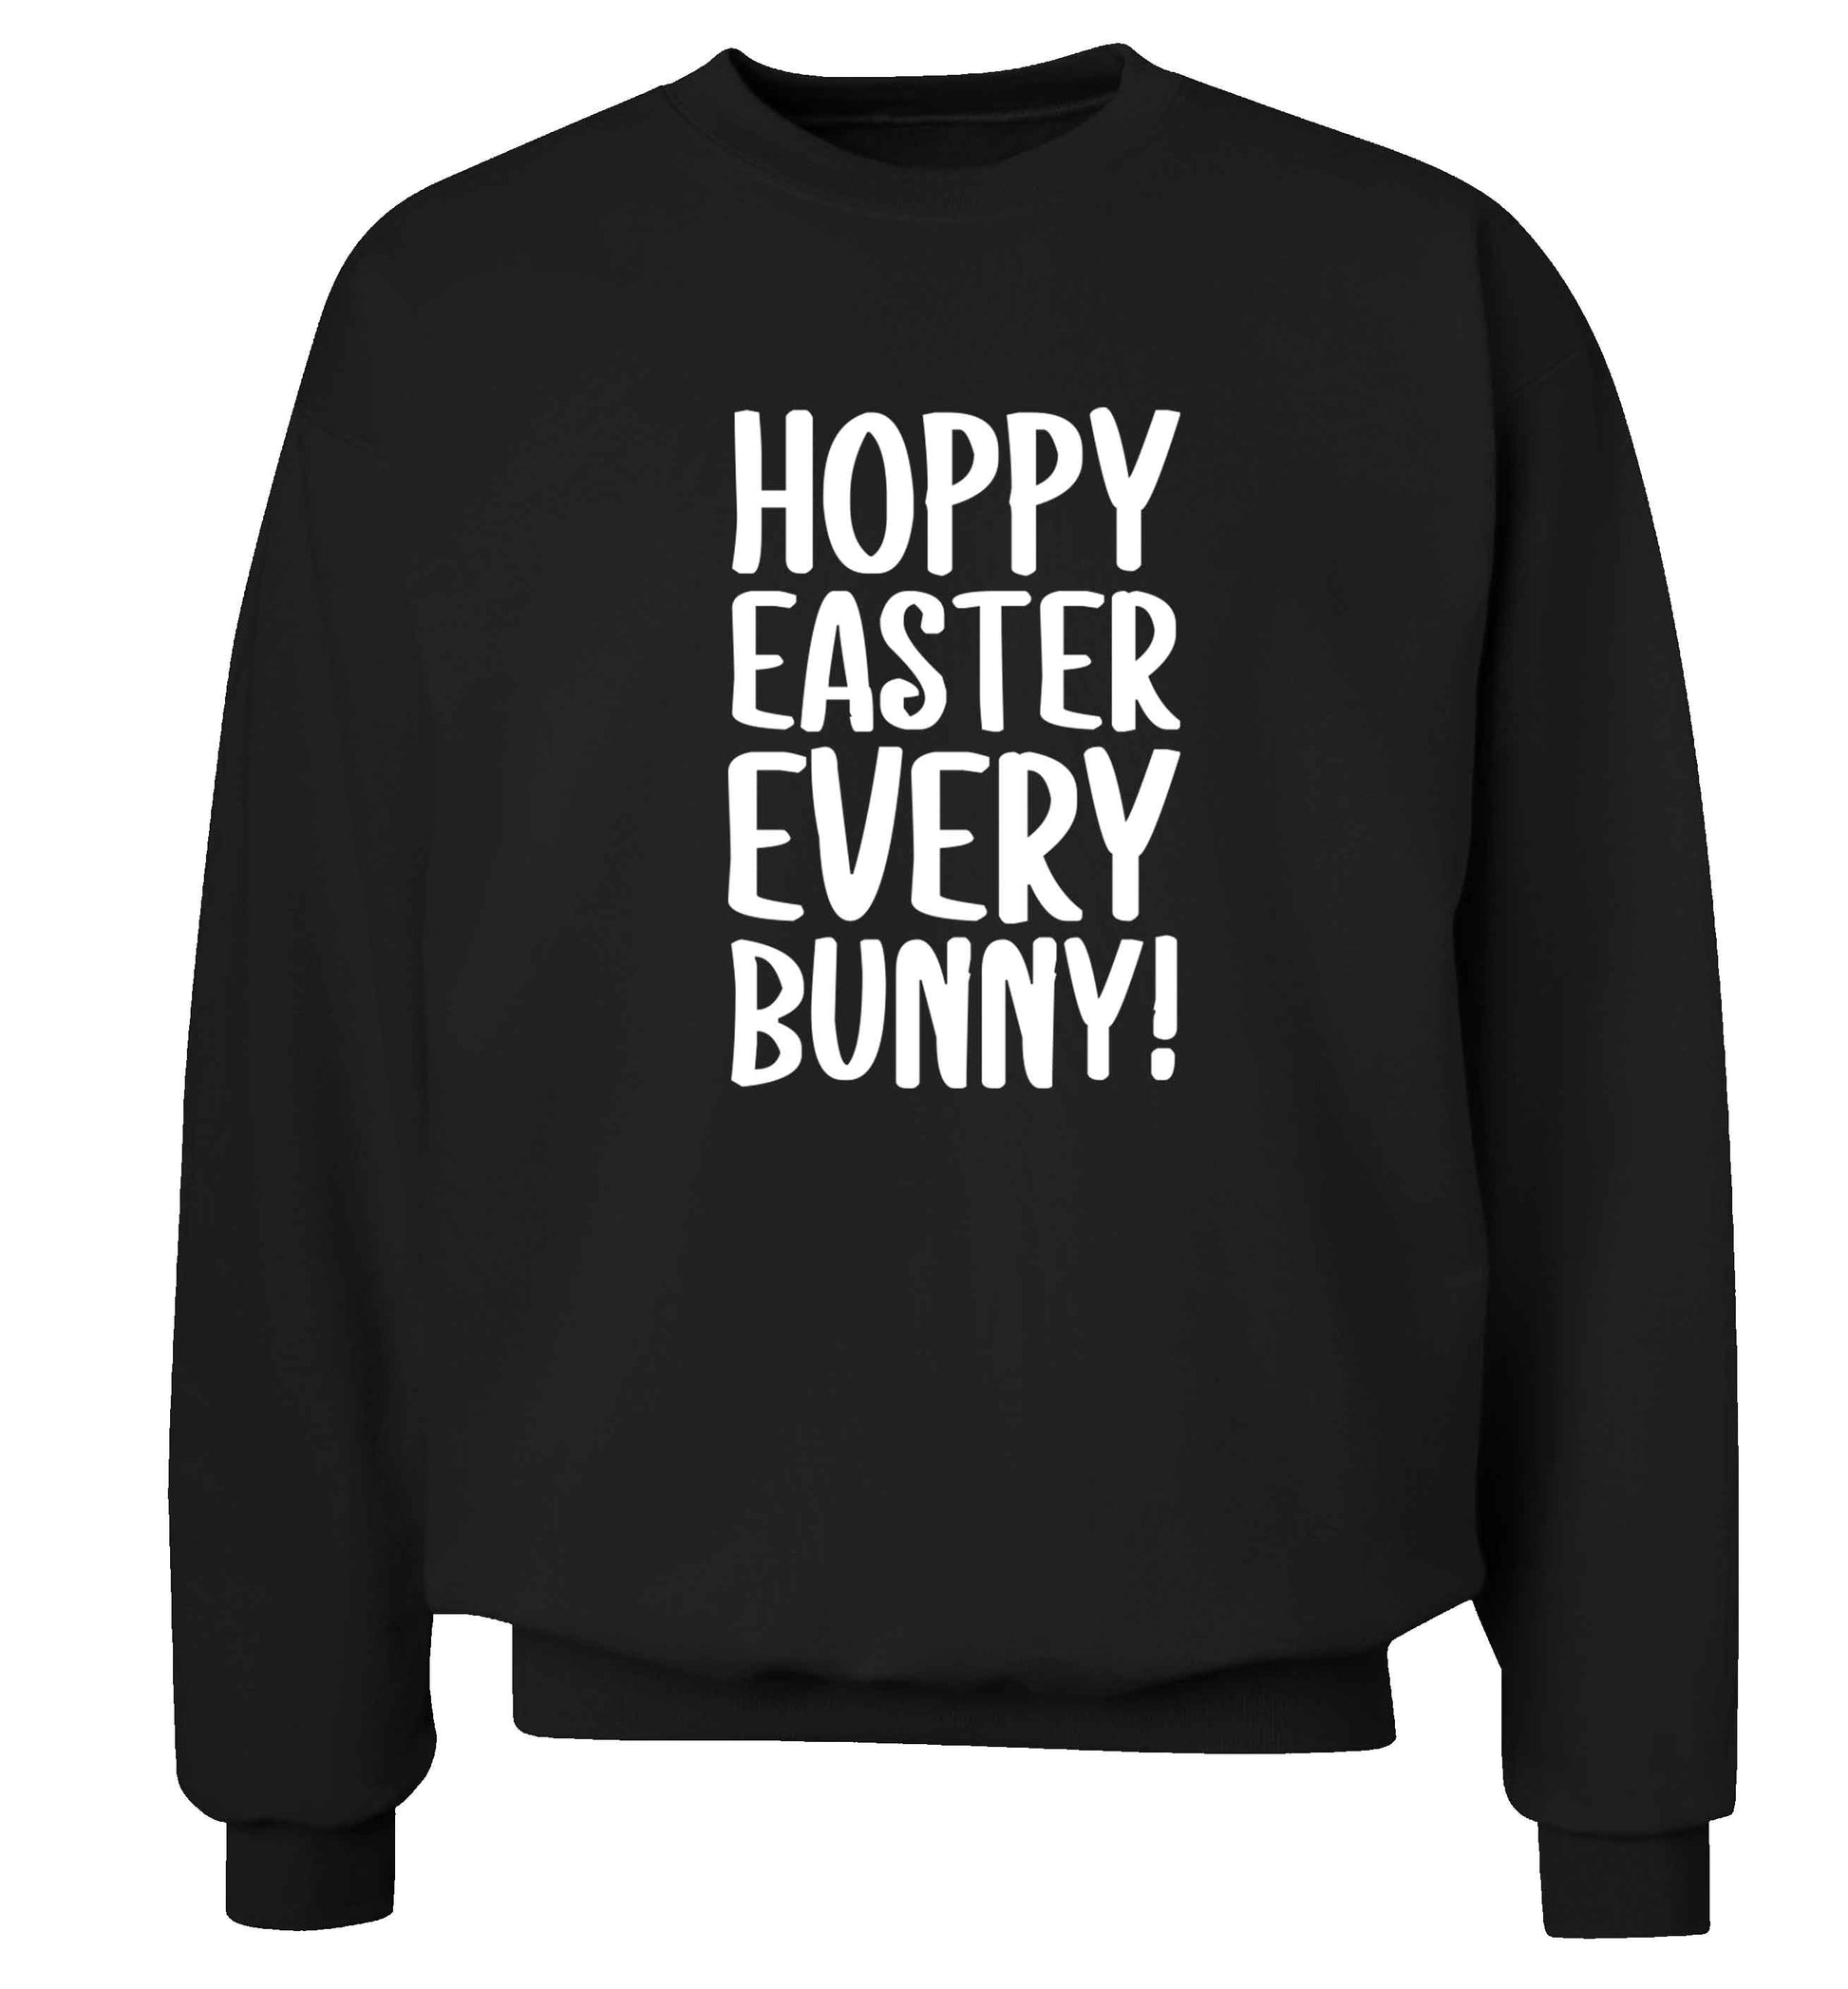 Hoppy Easter every bunny! adult's unisex black sweater 2XL